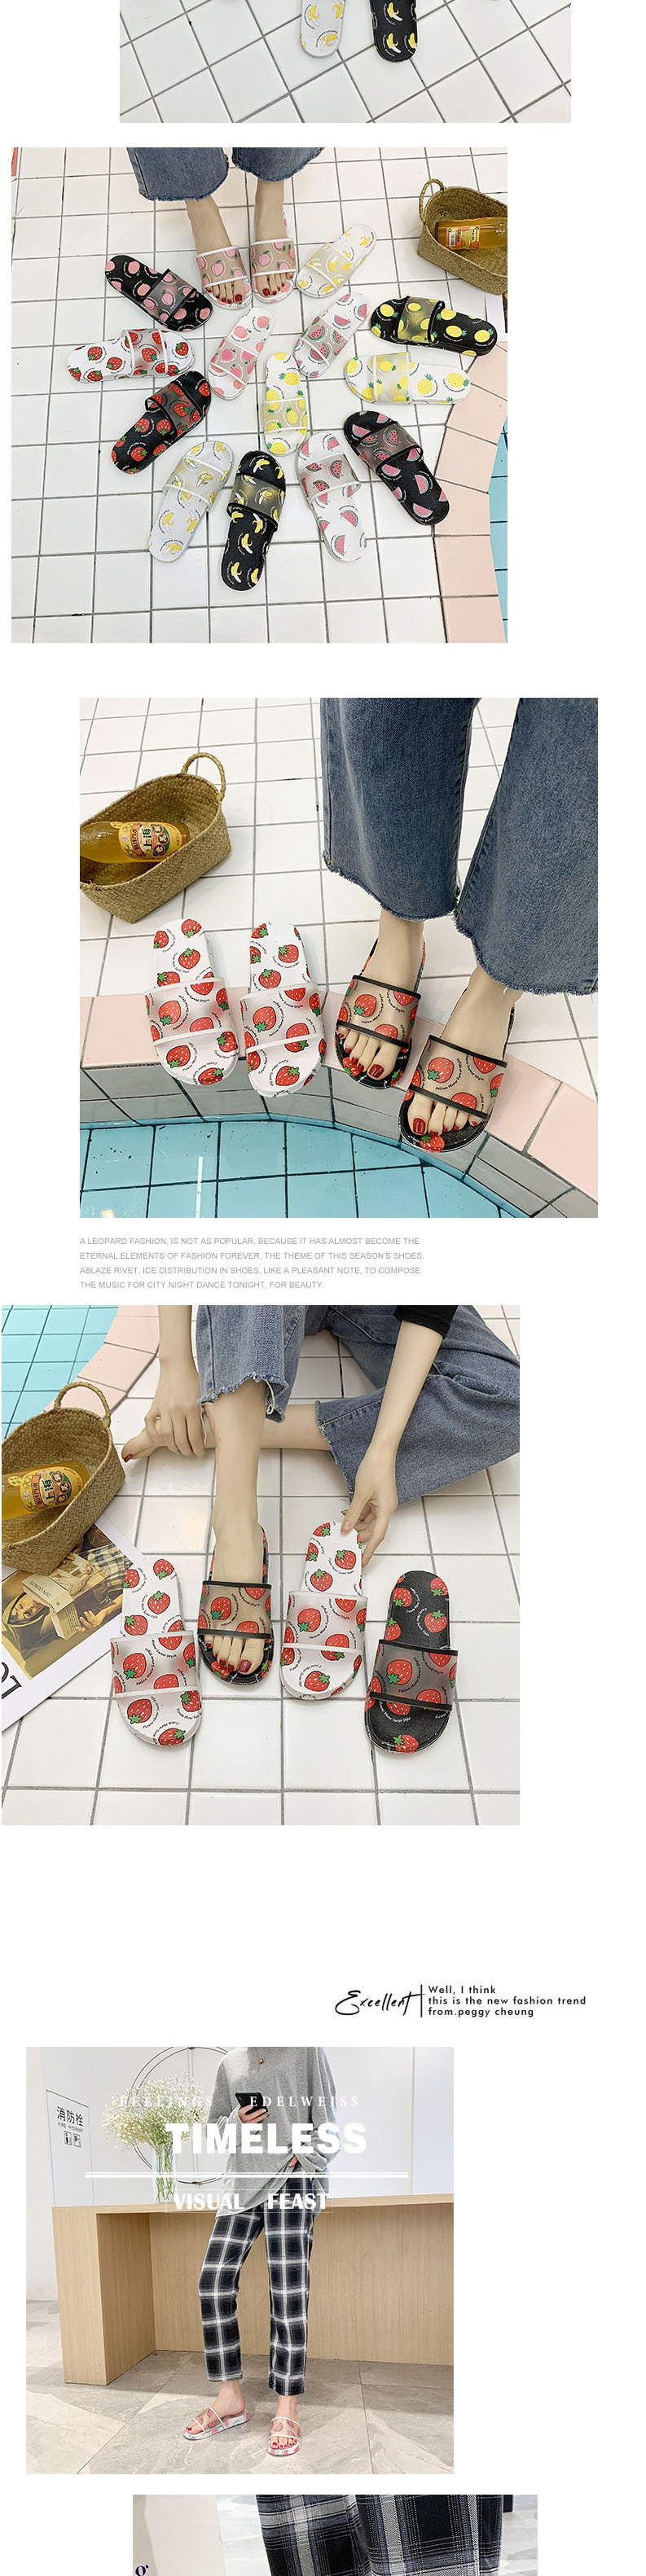 Fashion Watermelon With White Fruit Fruit Sandals,Slippers